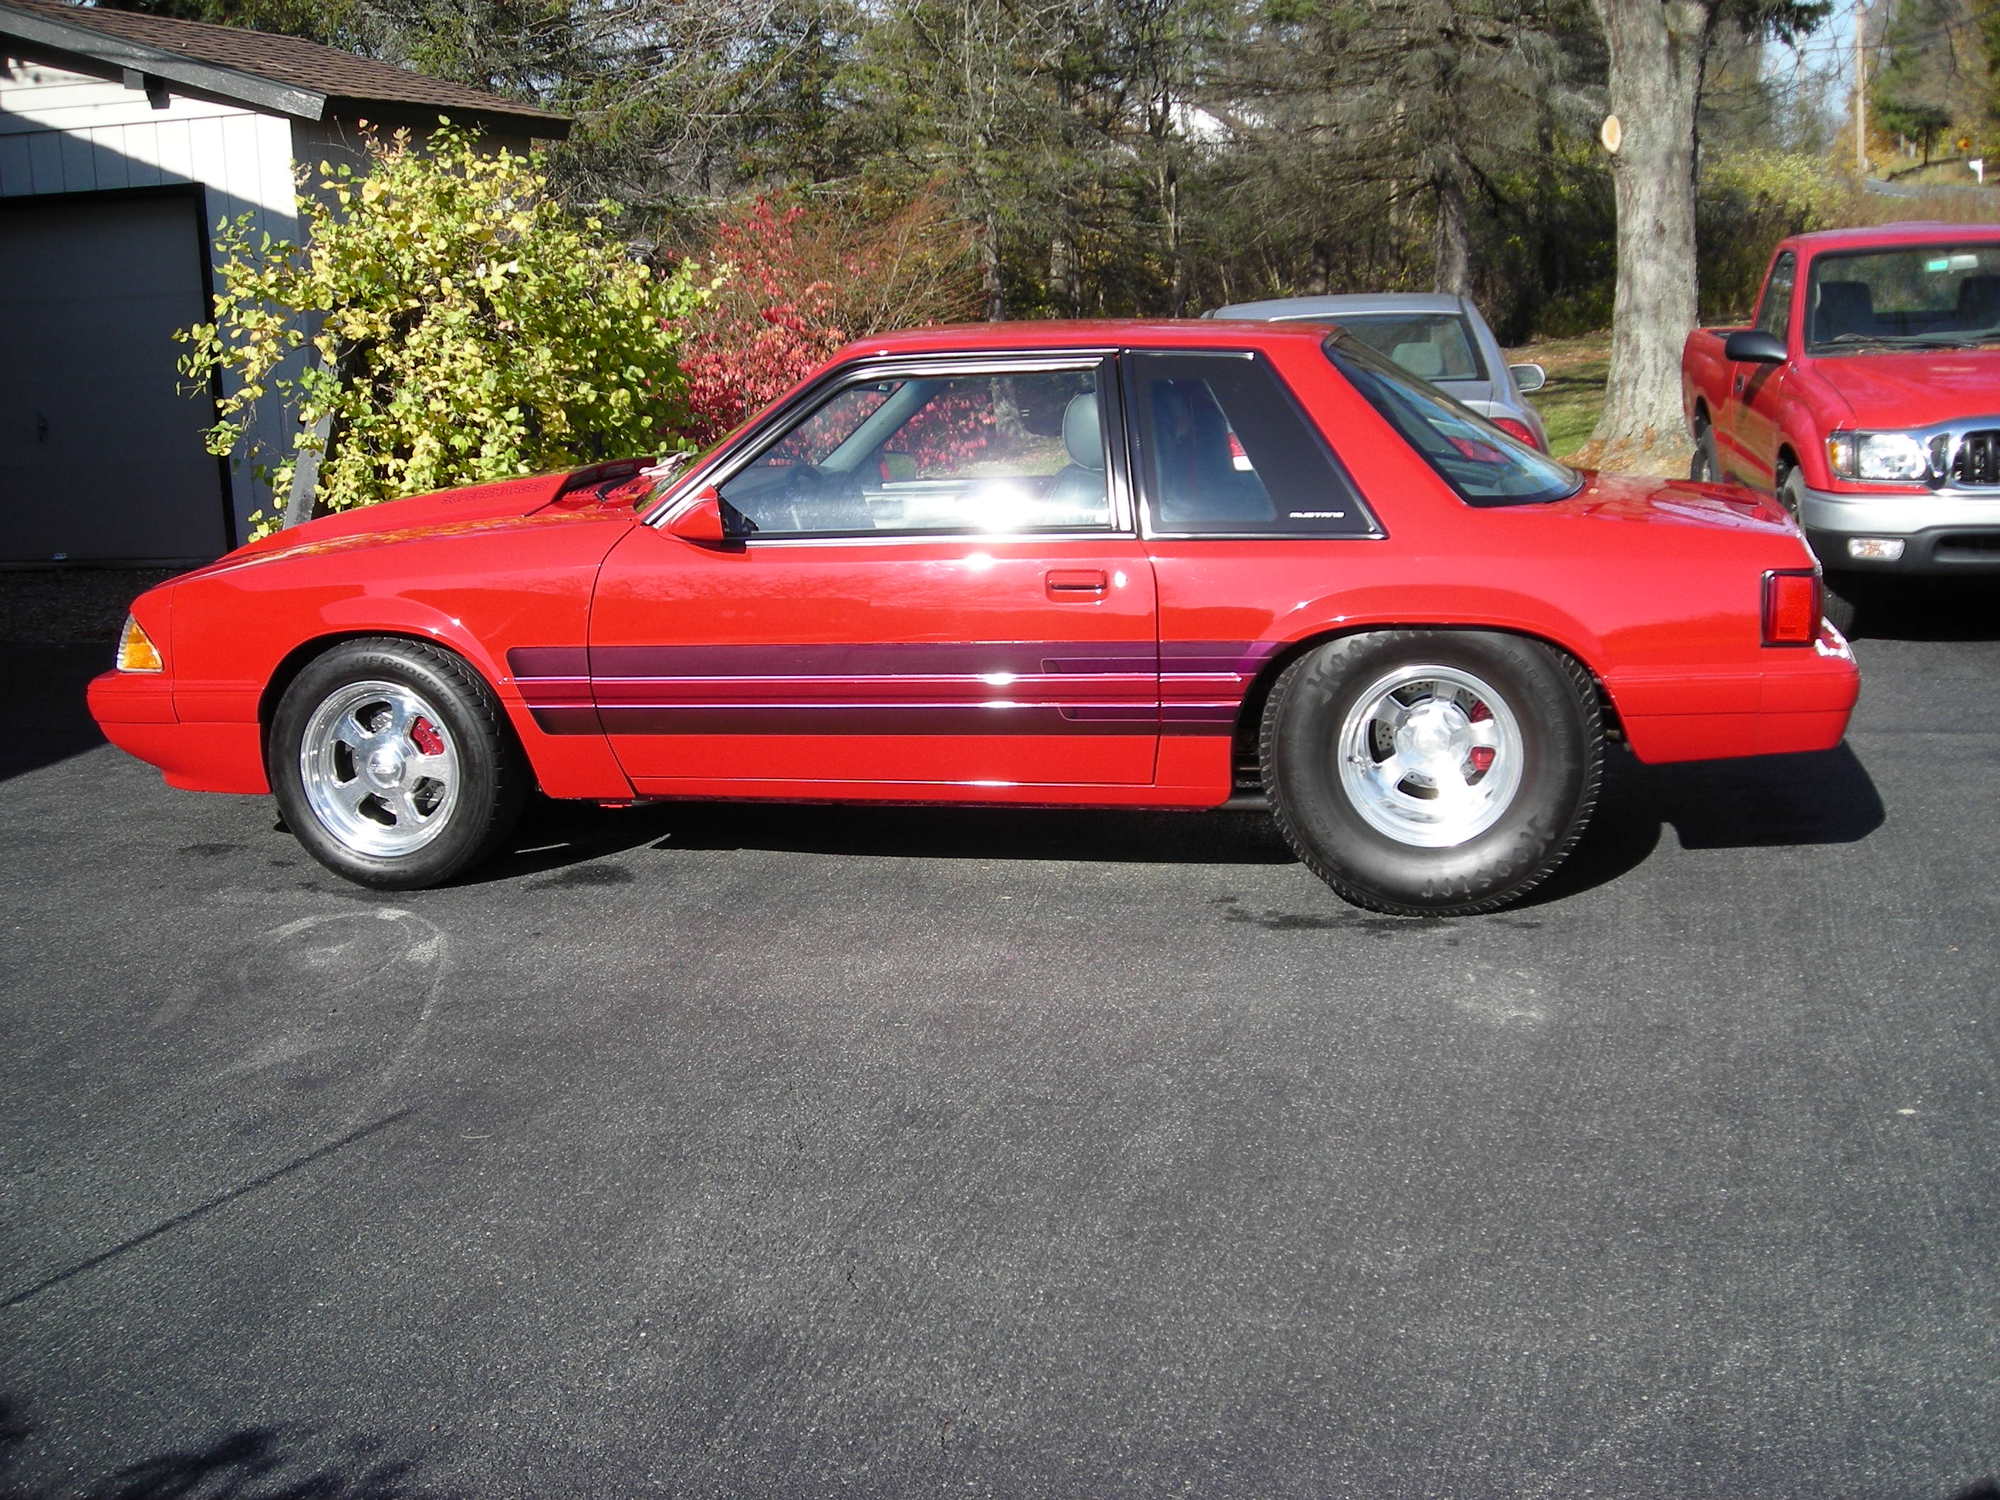 1979 Ford Mustang - '79 Pro Street Mustang - Used - VIN 9f04f177374 - 14,000 Miles - 8 cyl - 2WD - Manual - Coupe - Red - Slingerlands, NY 12159, United States